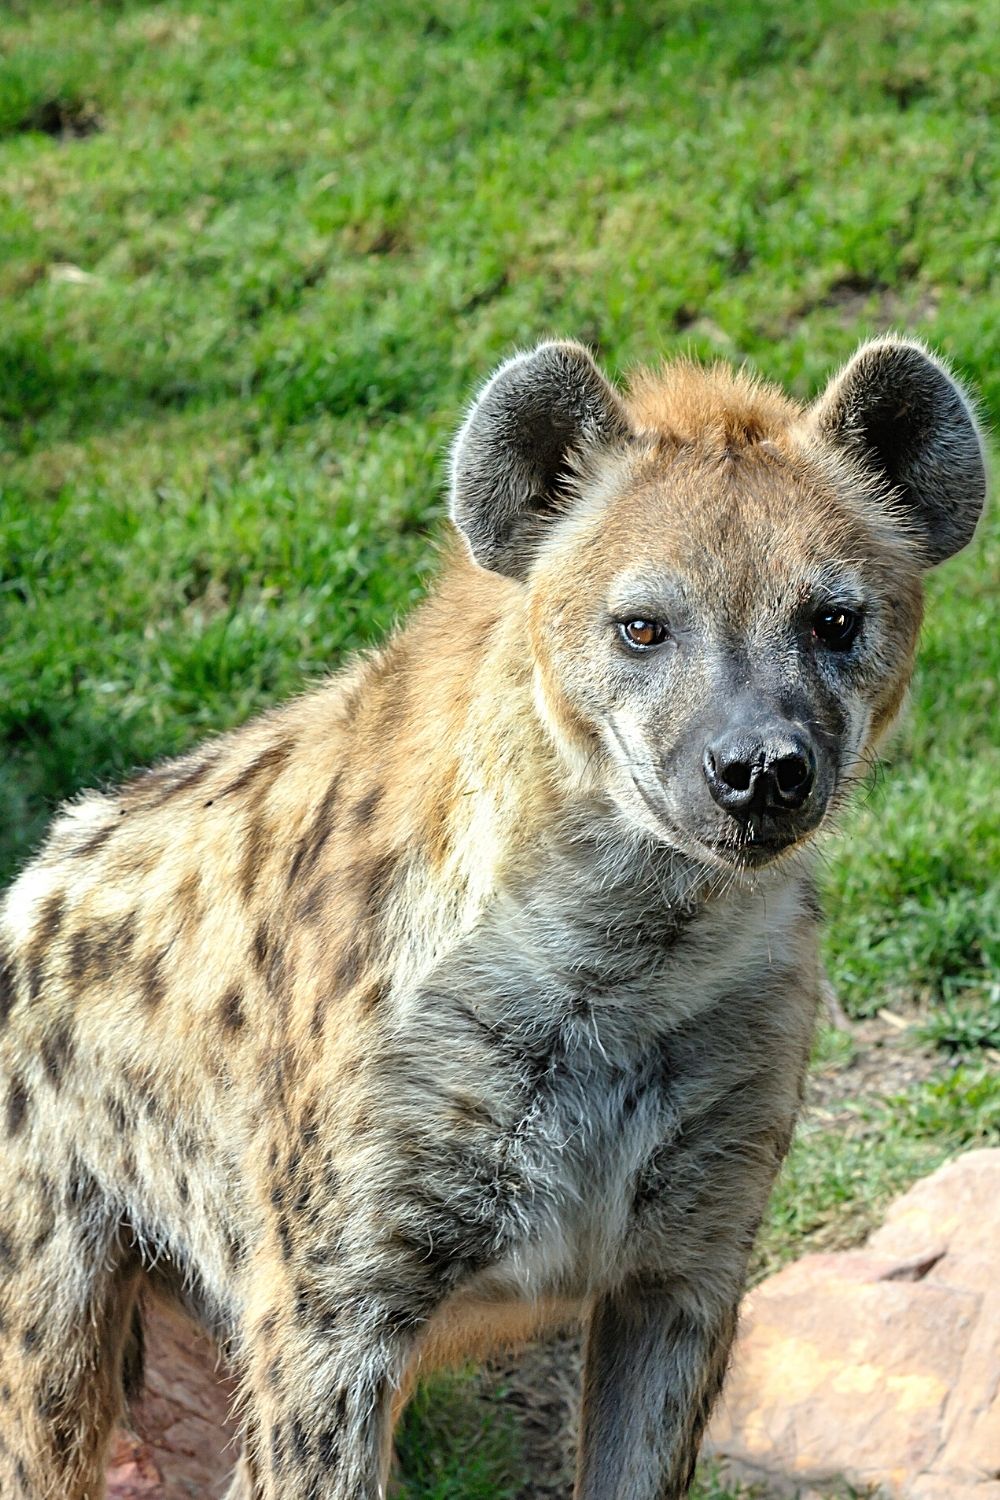 Spotted hyenas can consume over 30 pounds of meat, making them weigh more than other hyena types